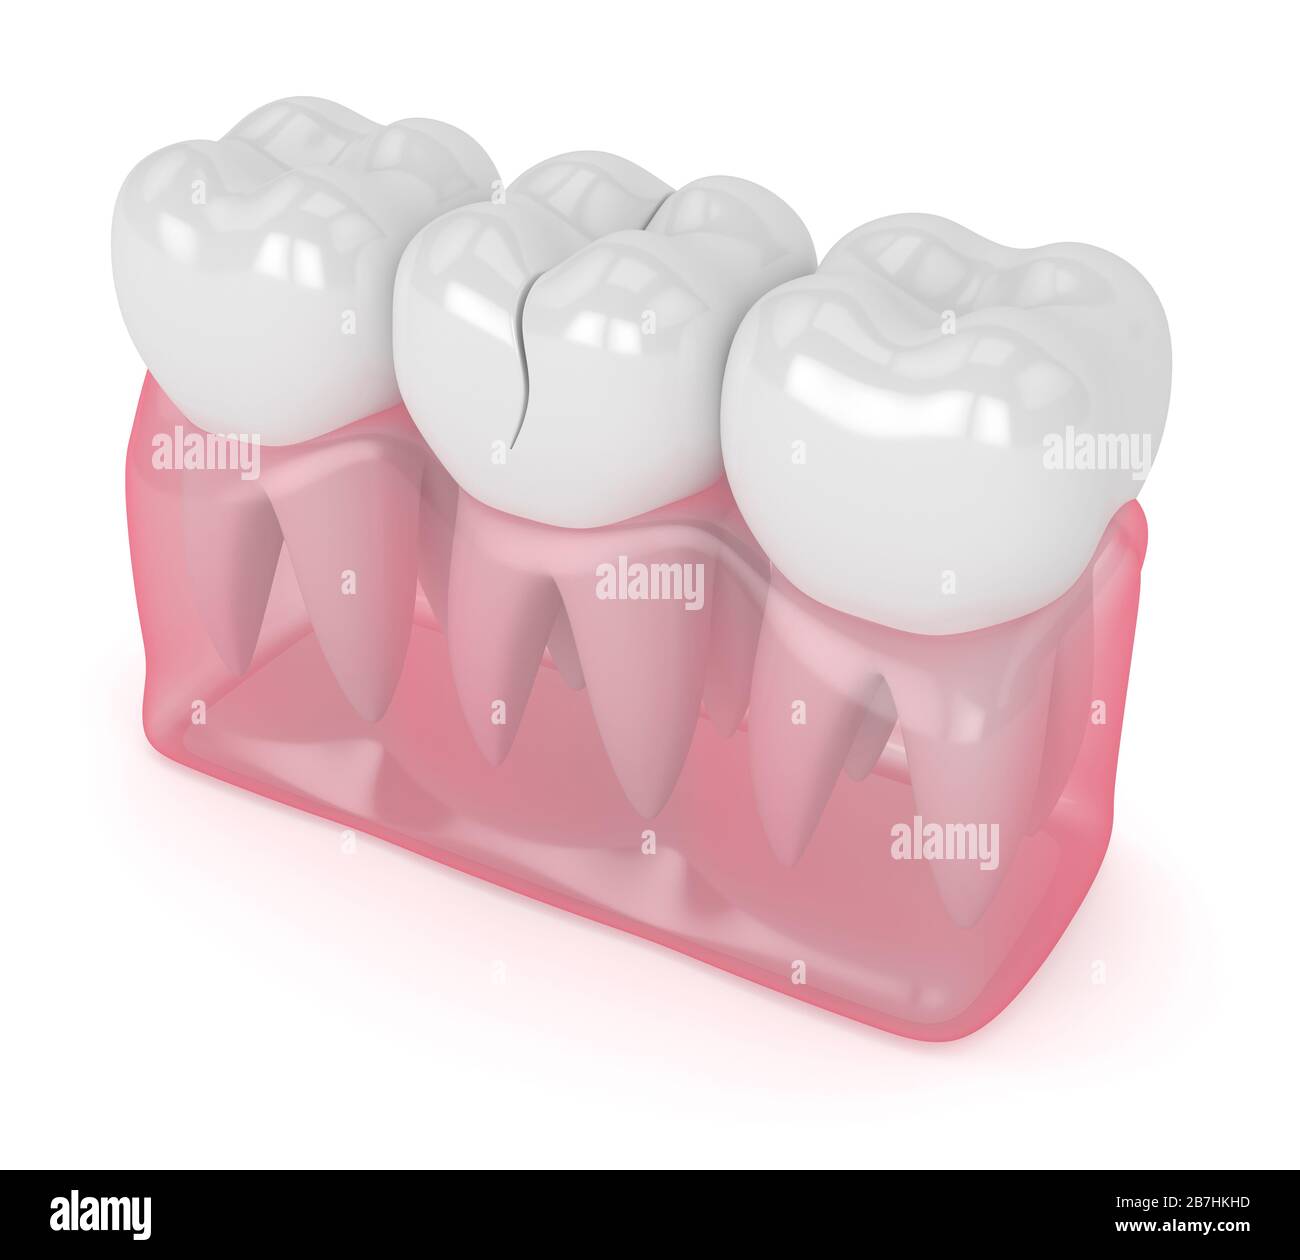 3d render of jaw with treatable cracked tooth over white background. Different types of broken teeth concept. Stock Photo